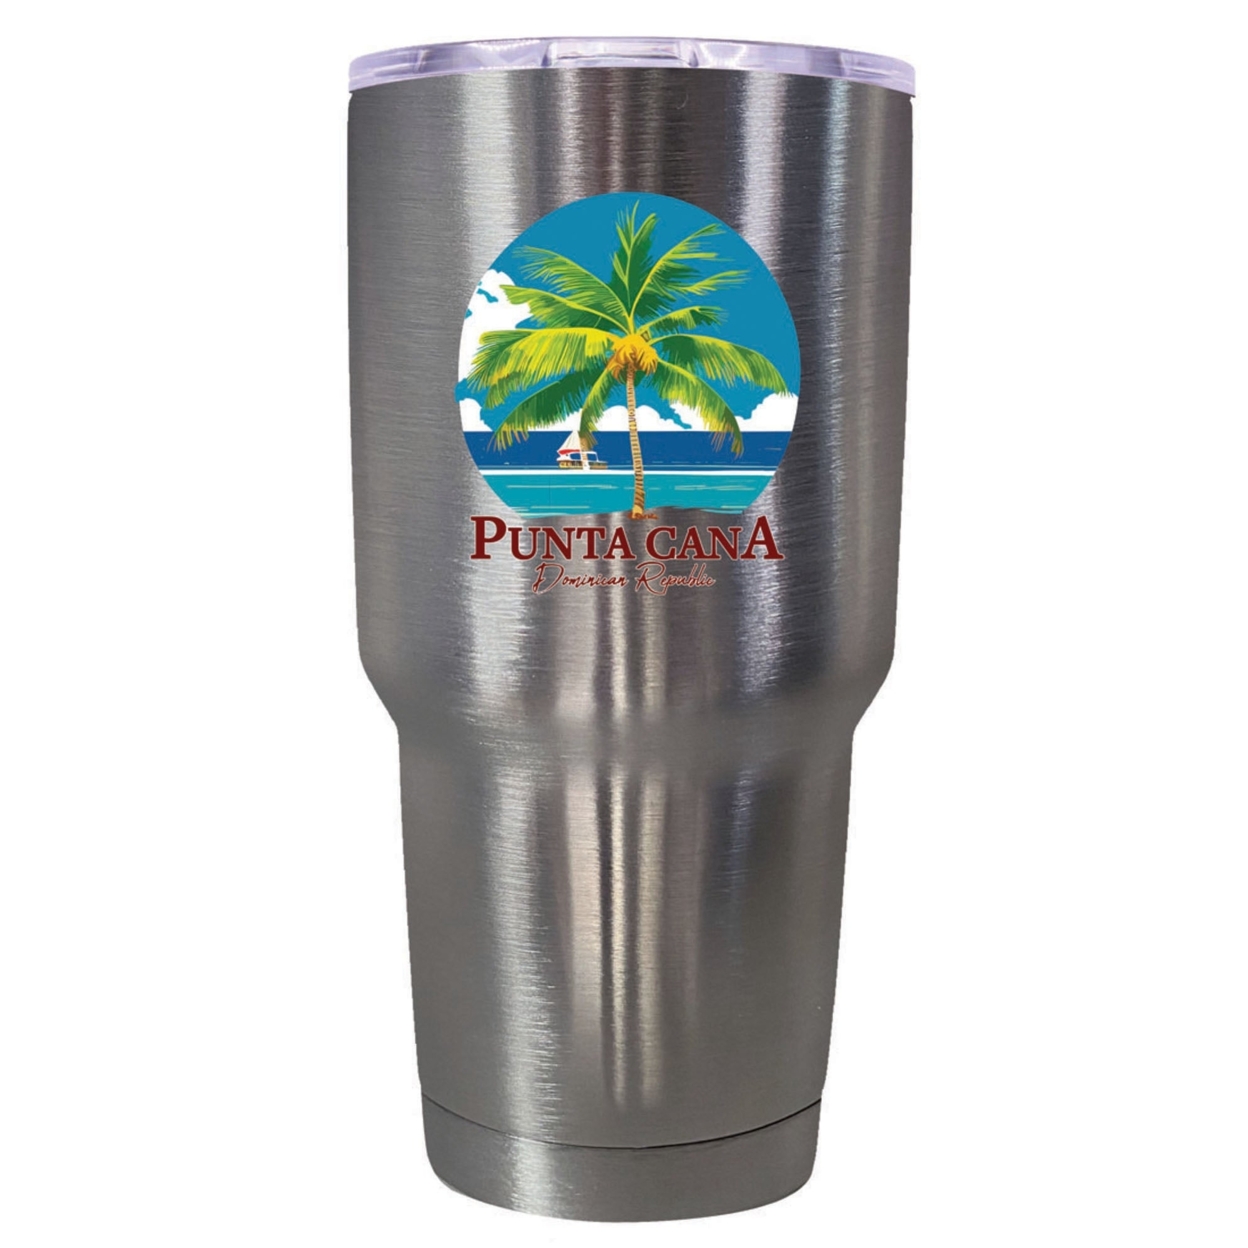 Punta Cana Dominican Republic Souvenir 24 Oz Insulated Stainless Steel Tumbler - Rose Gold, PARROT B